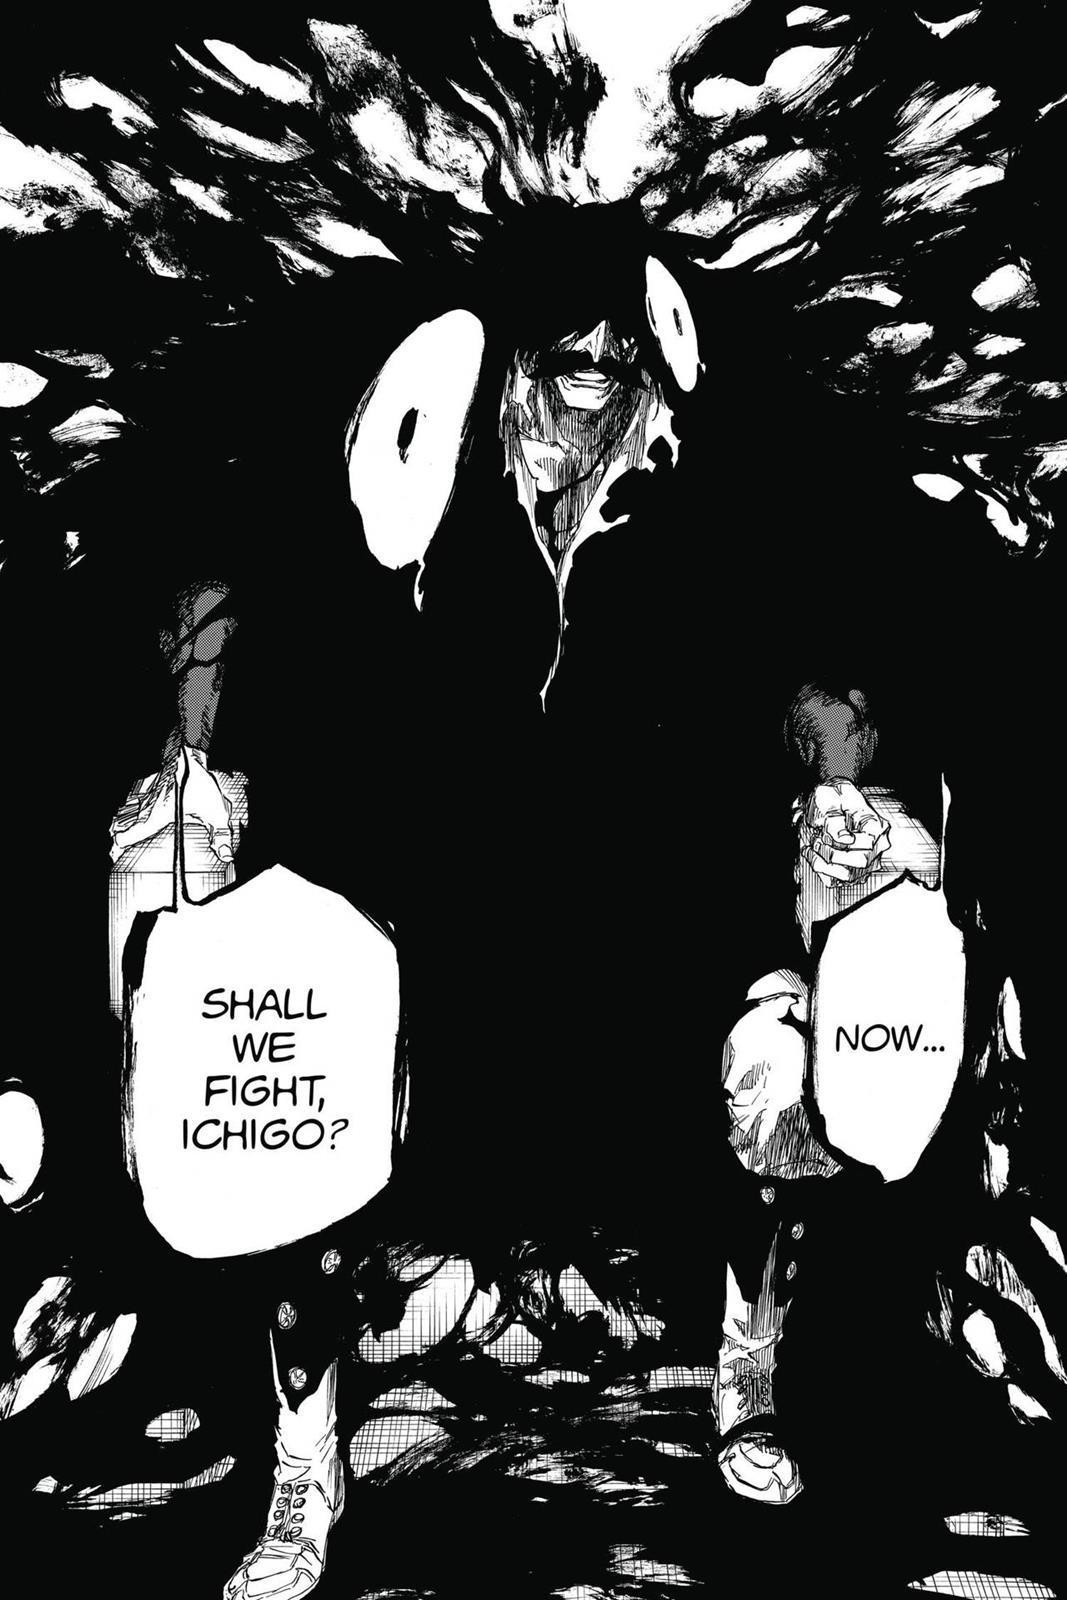 King Of The Quincy Yhwach(Bleach) VS Thanos The Titan(Marvel) (STATS